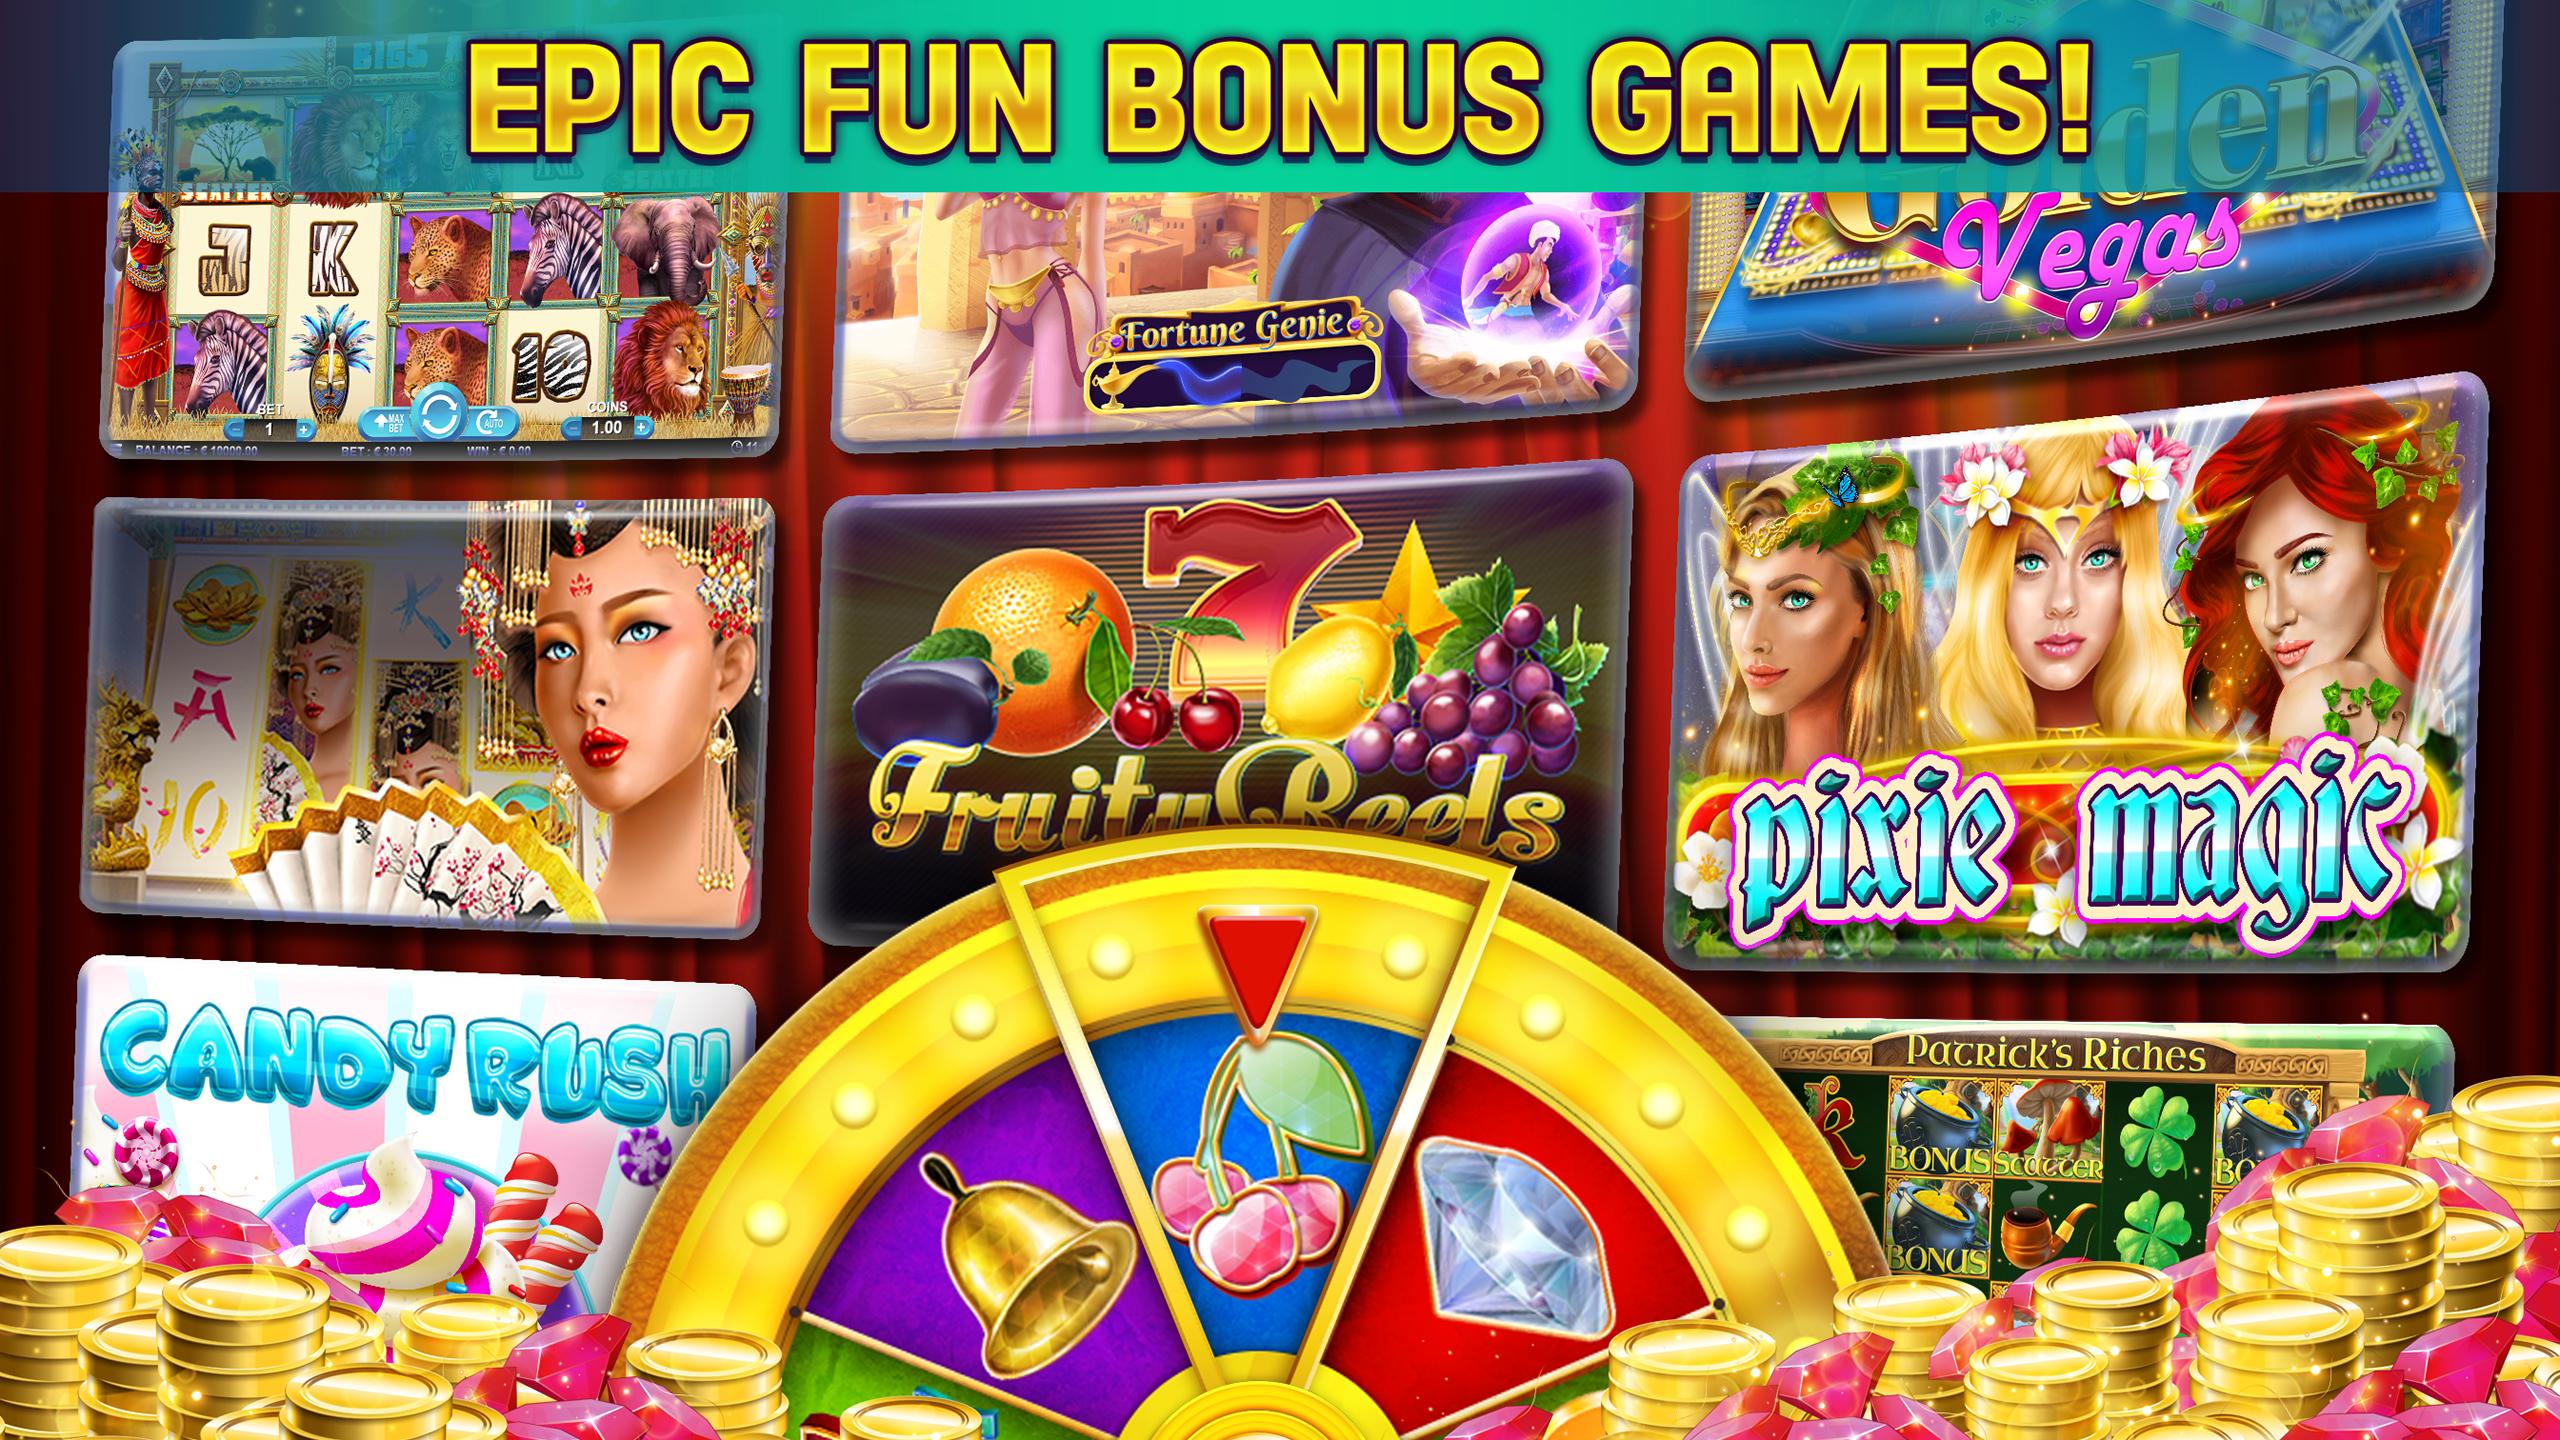 Skill Slots Offline - Free Slots Casino Game for Android - APK Download